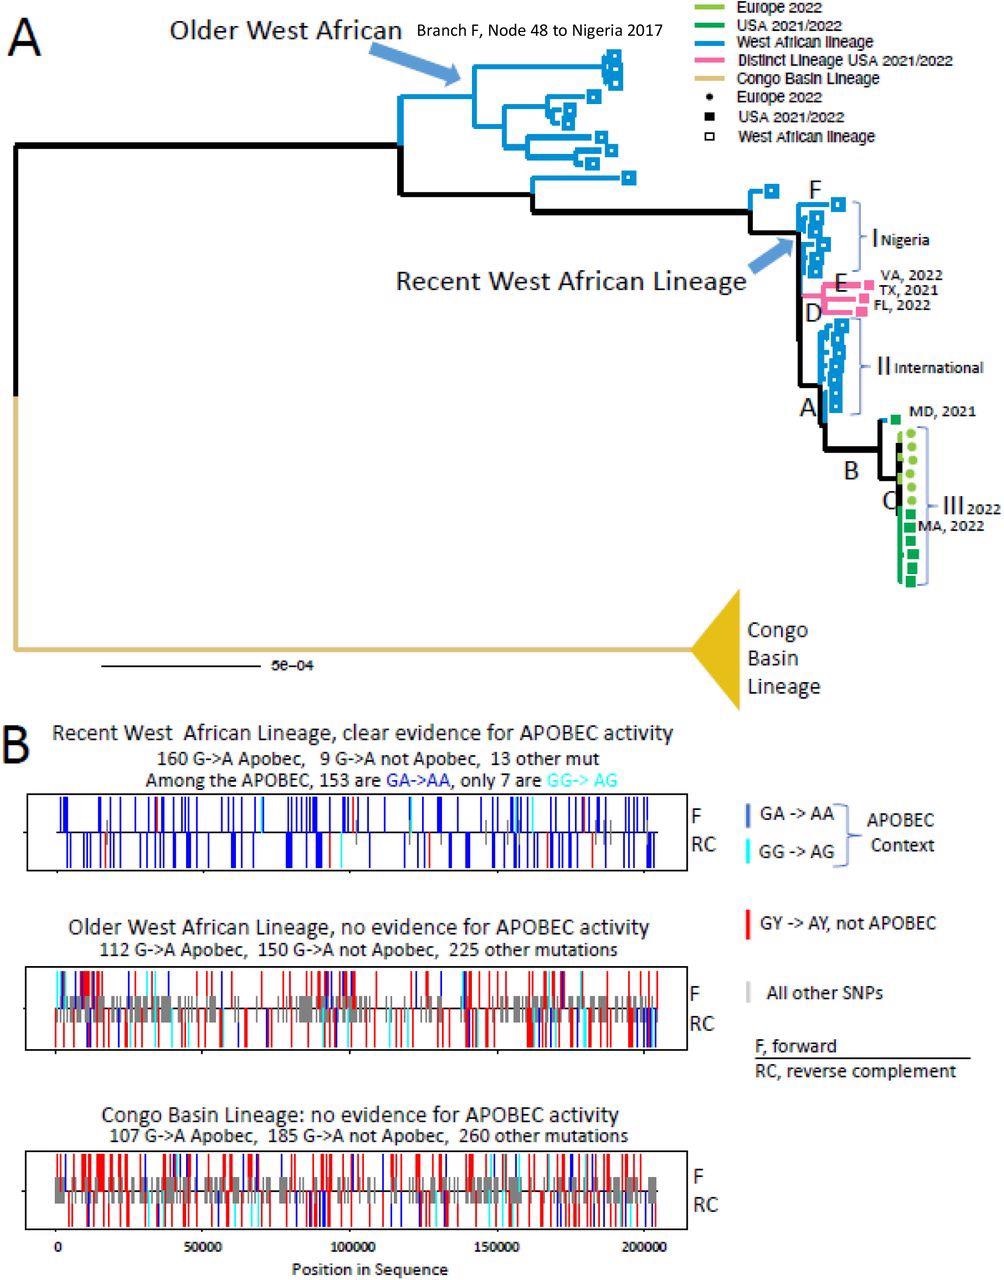 Analysis of APOBEC3 motif mutations in the West African MPXV lineage. A. Maximum Likelihood phylogenetic tree using IQ-TREE (29). A detailed tree, with taxa names is included in Fig. S1. The scale bar indicates the number of substitutions per sequence site. Letters A-E indicate branches that were each independently significantly enriched for G-A mutations embedded in an APOBEC3 motif. Clusters I, II, and III represent clusters of highly related sequences that have almost exclusively G-A mutations embedded in an APOBEC3 motif relative their most recent common ancestor. B. Mutational patterns found among the three major lineages in the phylogeny above. All unique mutations in a clade relative to the most recent common ancestor of that clade are compressed onto a single sequence, and the class of each mutation is show on either the forward or reverse complement strand. Blue bars indicate GA-to-AA (an APOBEC3 motif used by many APOBEC3 subfamily members, but not used by APOBEC3G), cyan indicates GG-to-AG (APOBEC3G motif), and red indicates GY to AY (non-APOBEC3 motif); shorter gray lines indicate all other single nucleotide polymorphism (SNP) mutations. Bars above the horizontal line indicates forward strand, below the line indicates reverse strand.